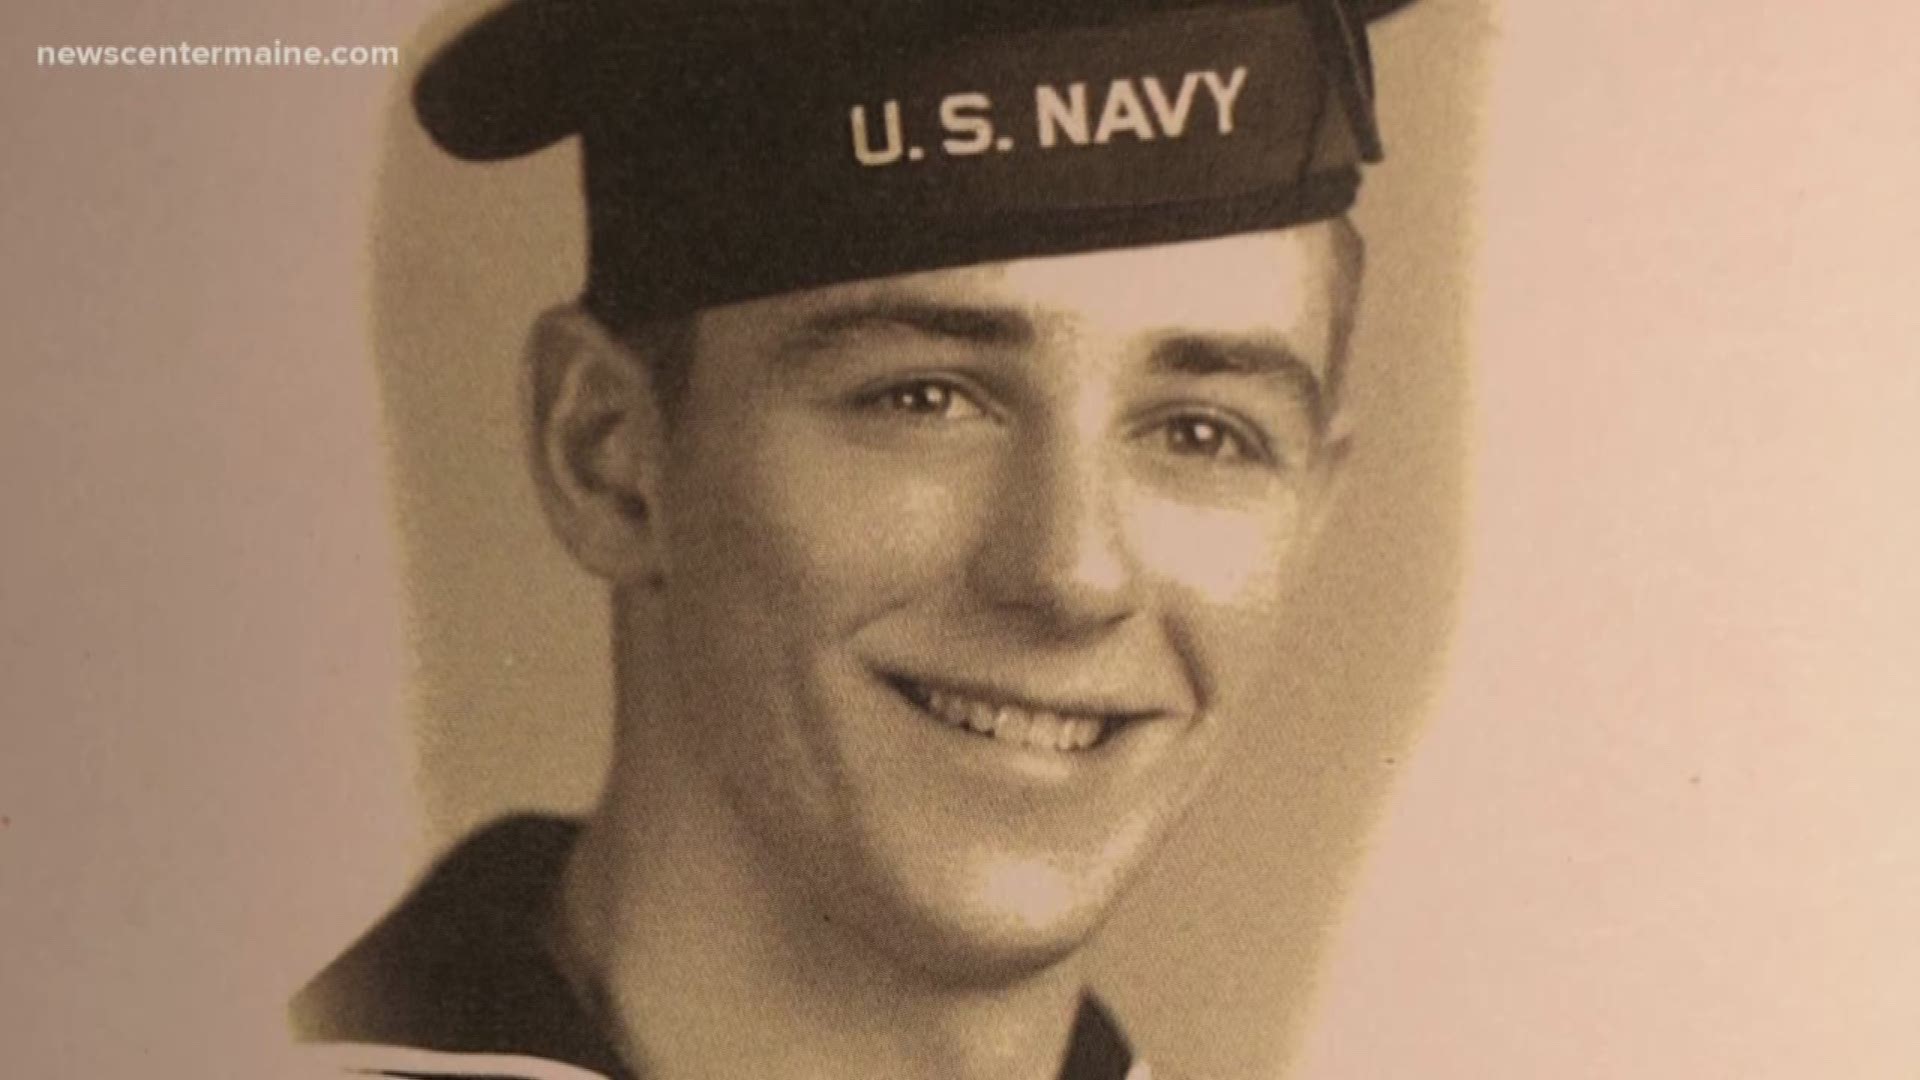 Del Gendron of Lewiston joined the Navy at 18 years old during World War II.